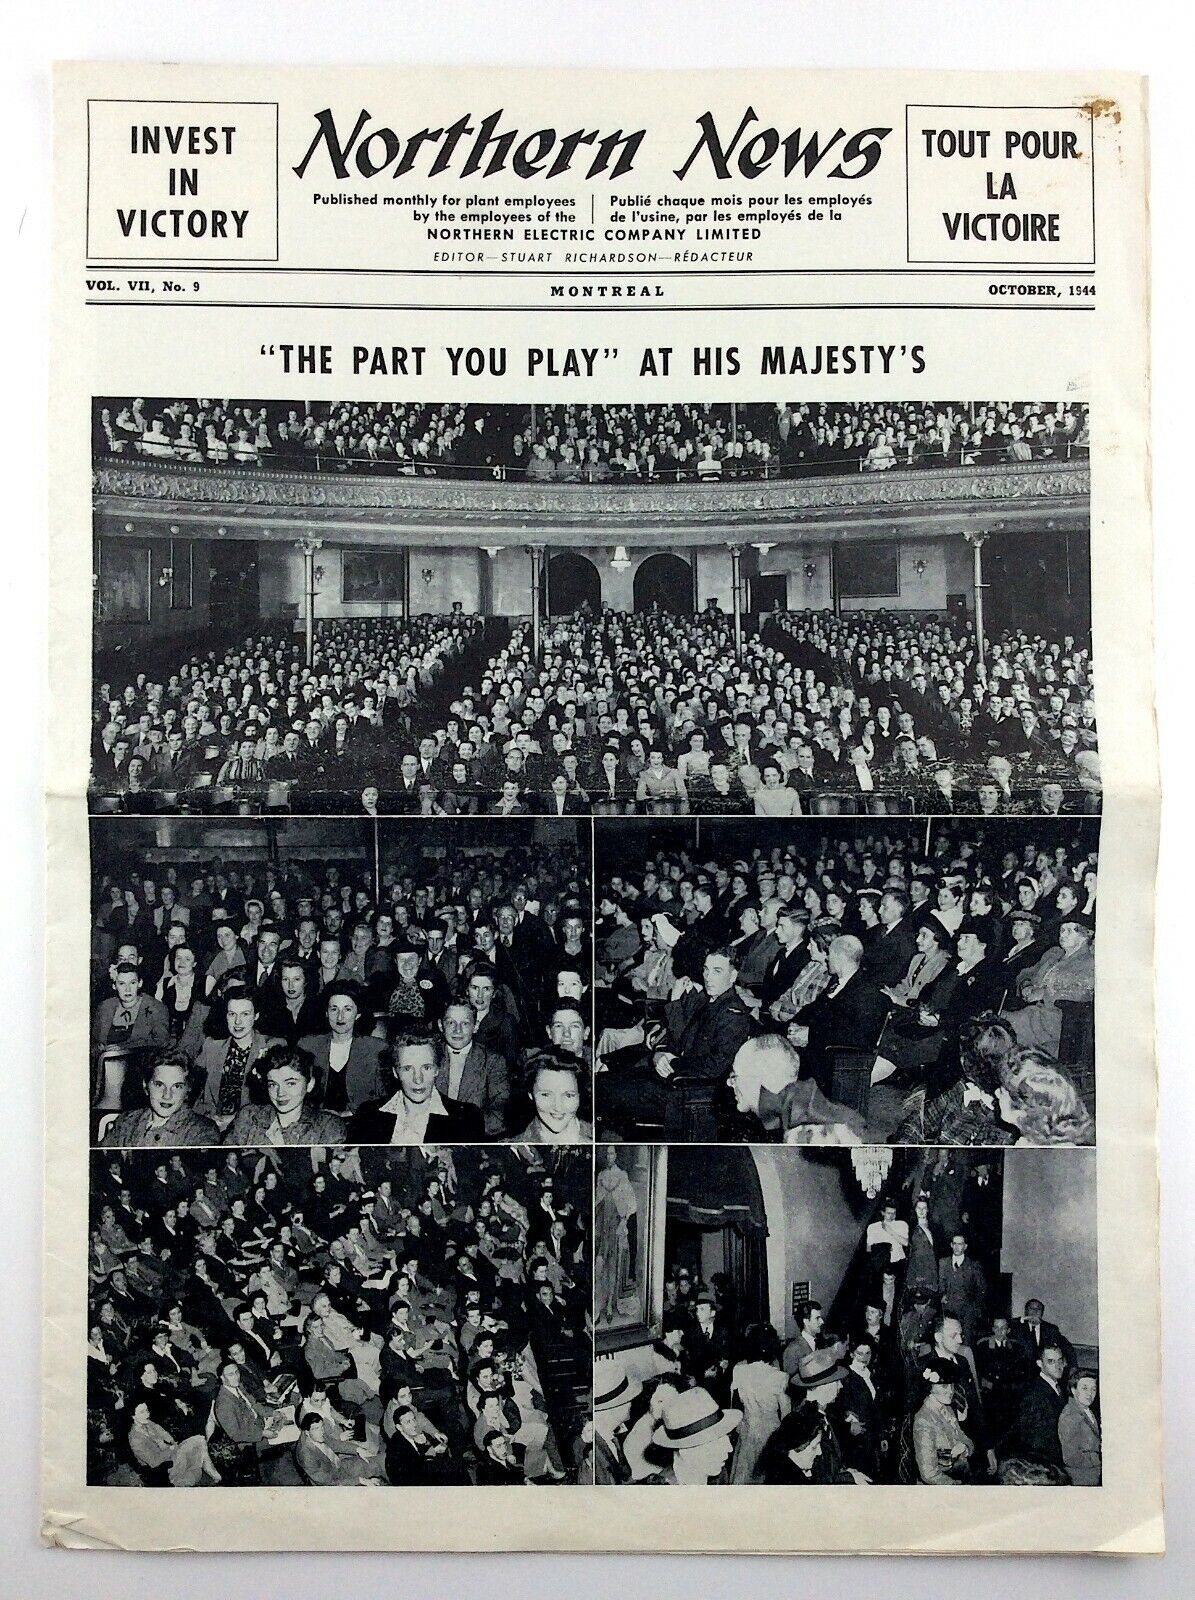 Northern News October 1944 Montreal Newsletter Invest In Victory WWII N127